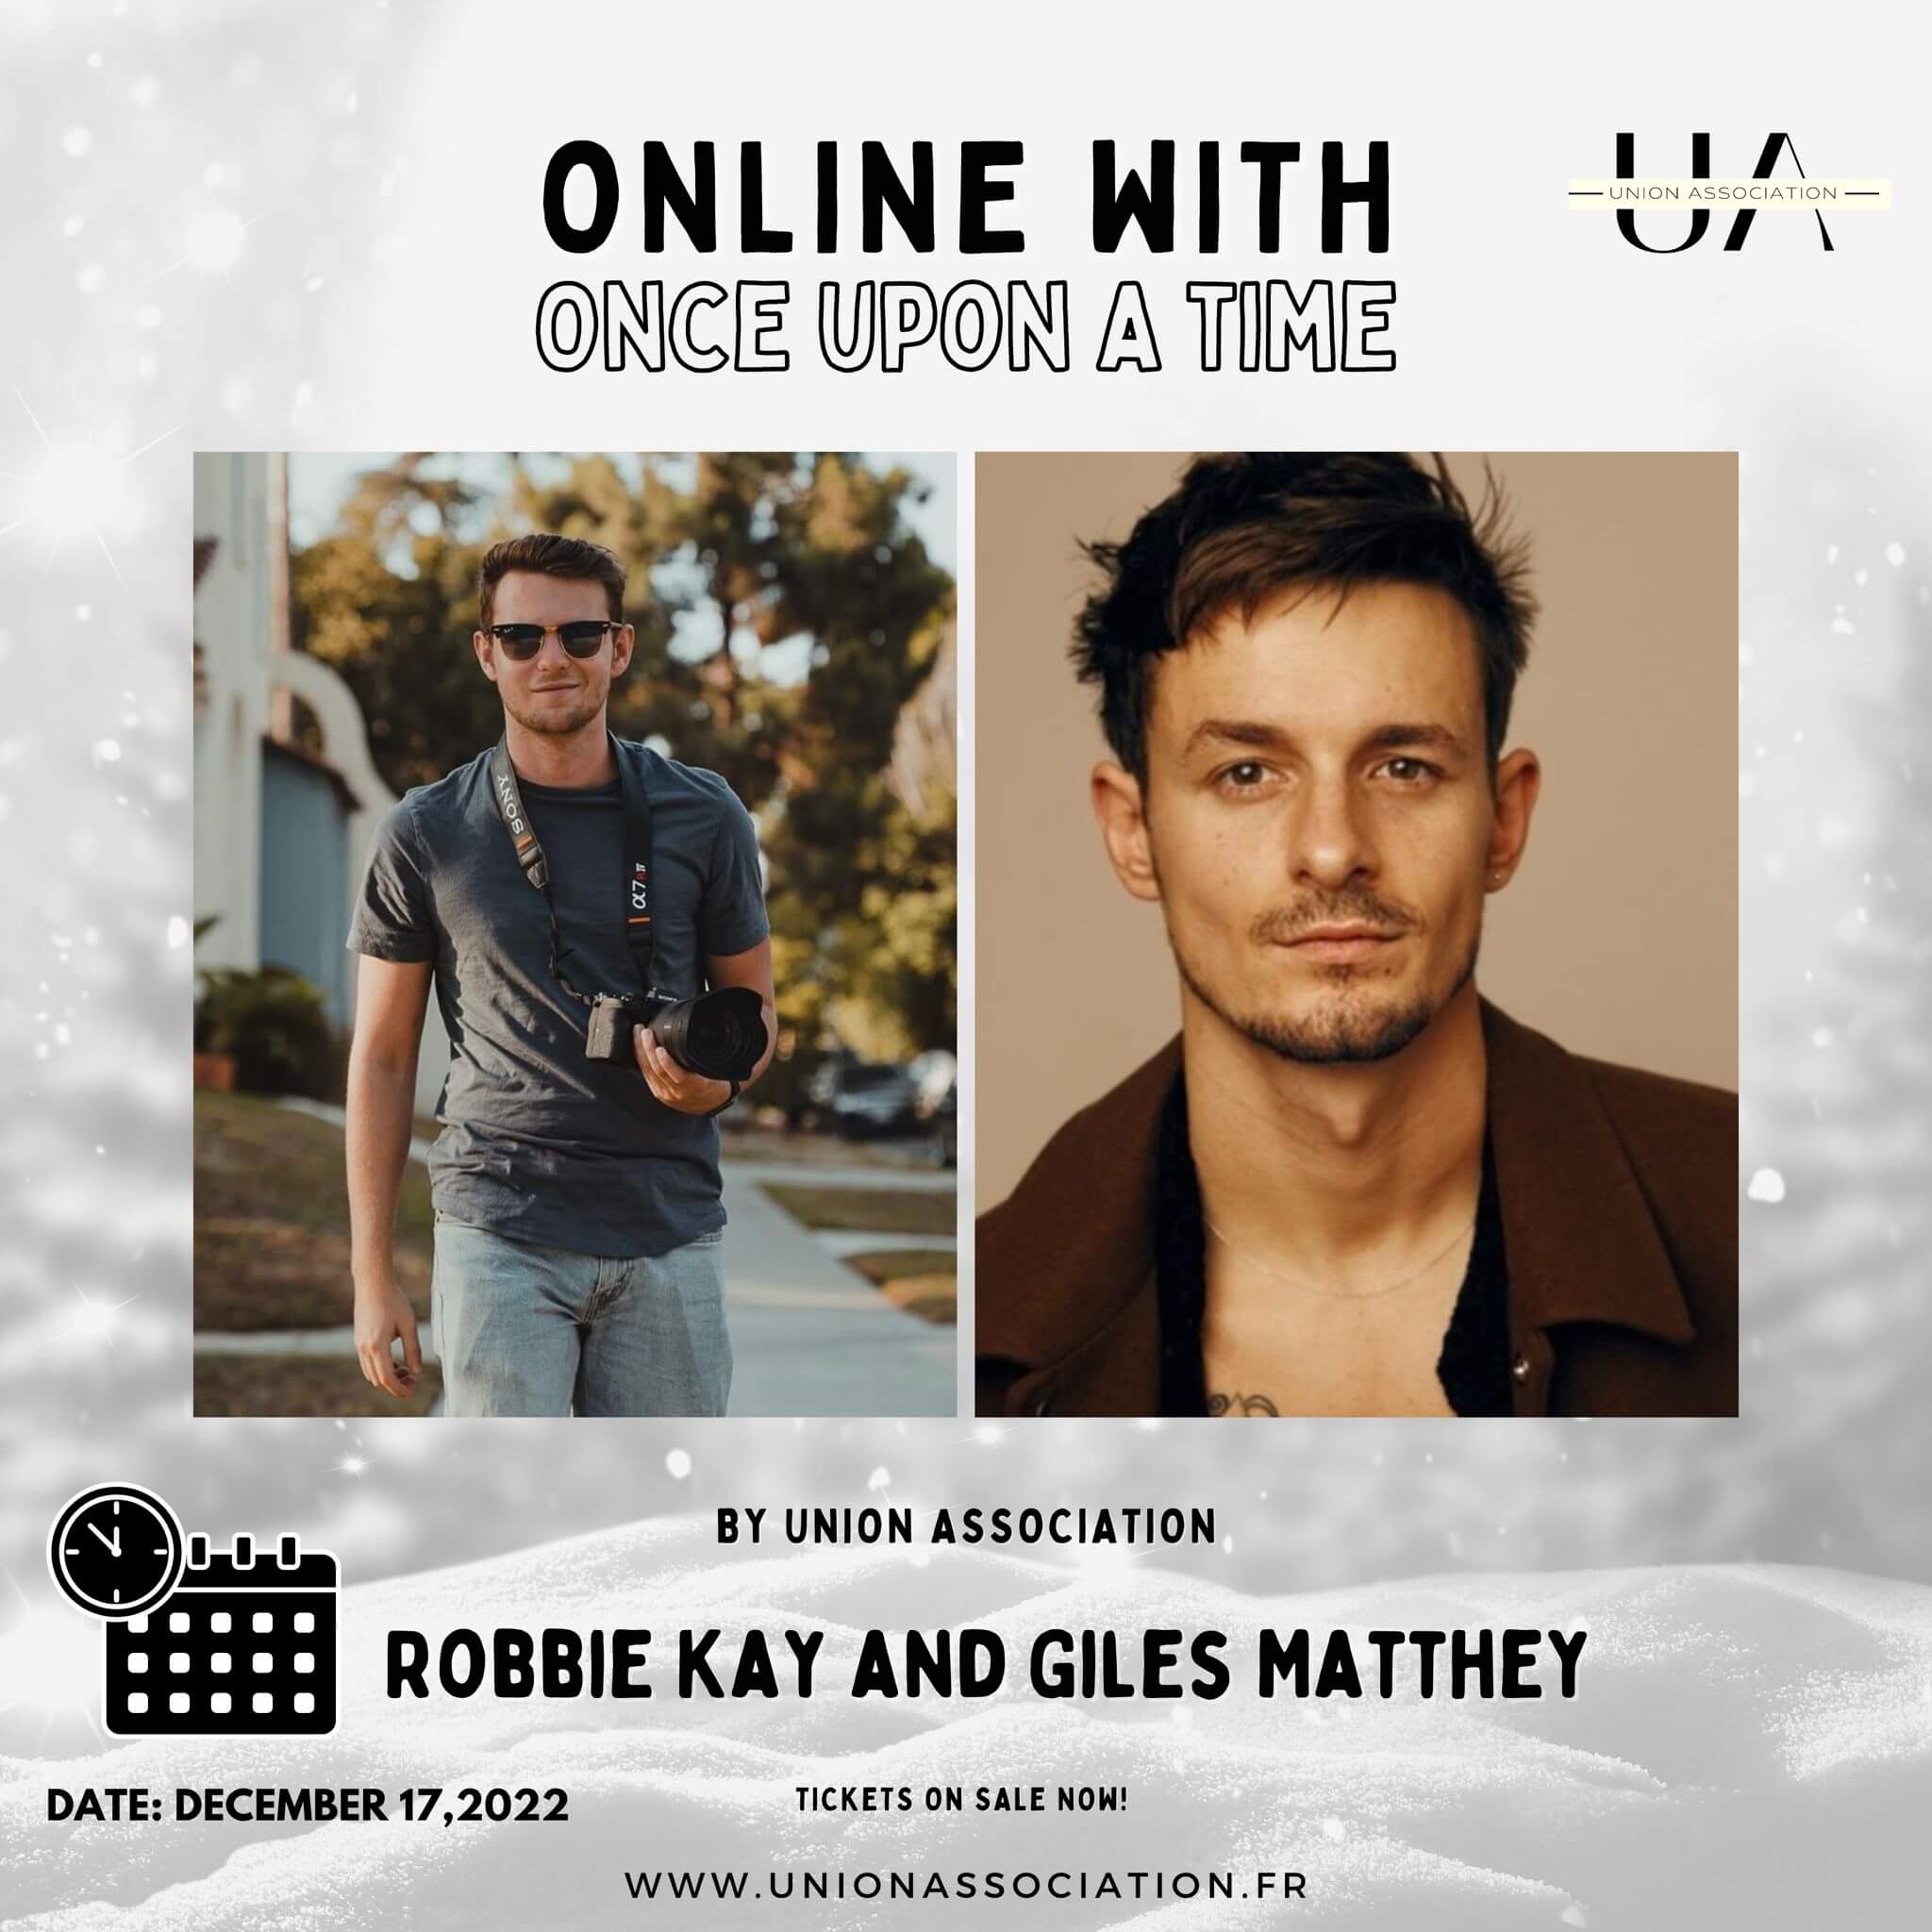 Online with Robbie Kay & Giles Matthey